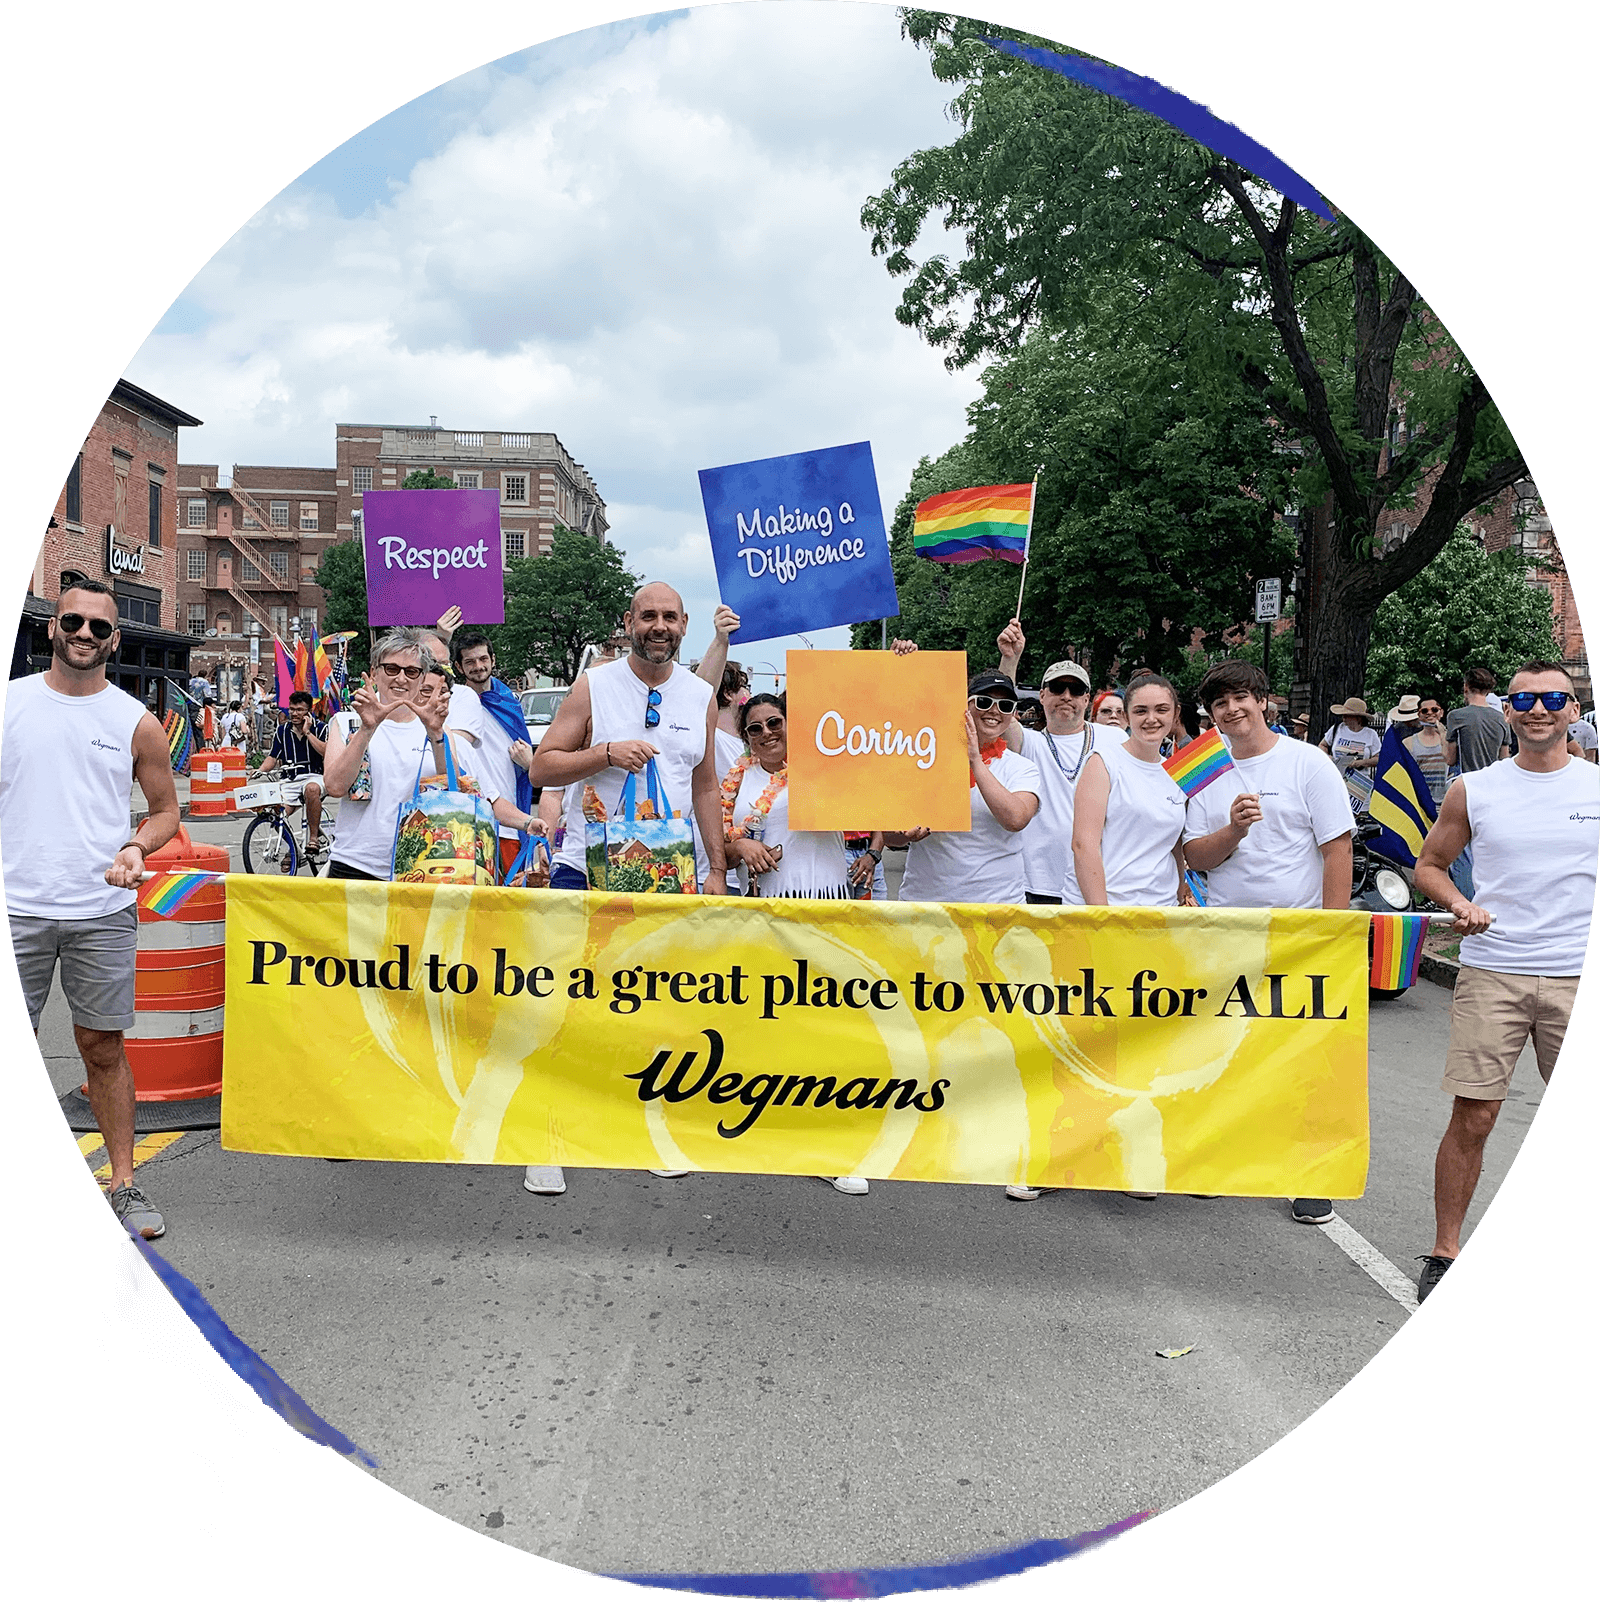 Wegmans employees and family marching in a Pride parade